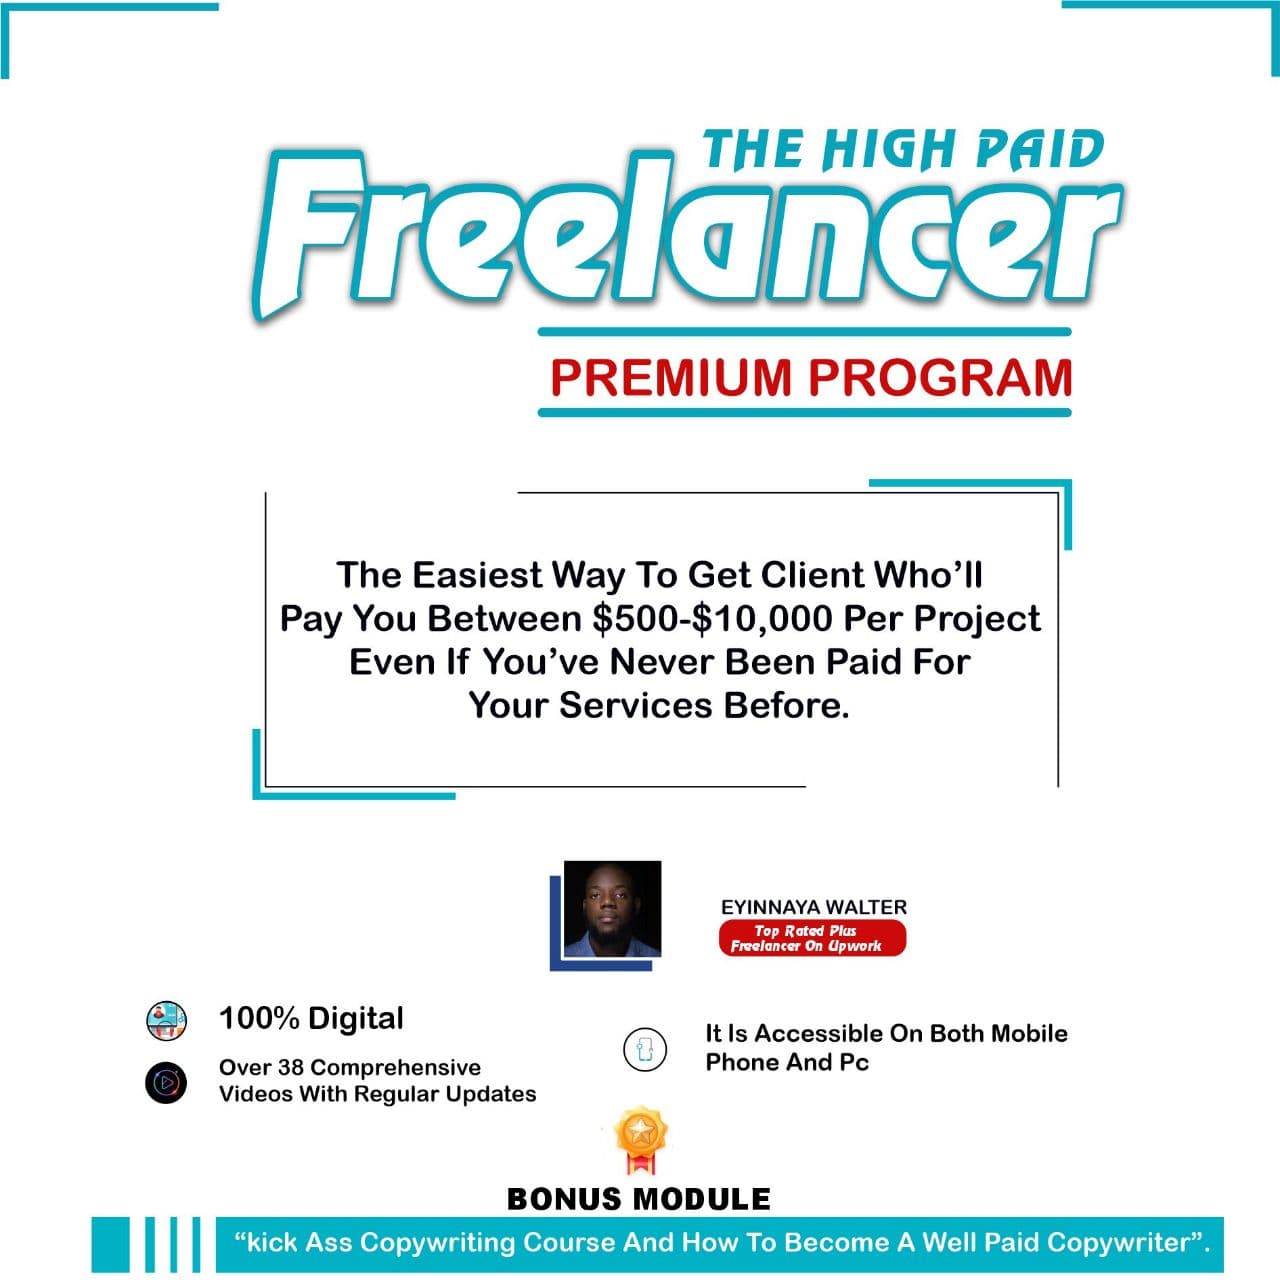 High Paid Freelancer Premium Program The Fastest, Easiest And Most Reliable Way To Get Client...